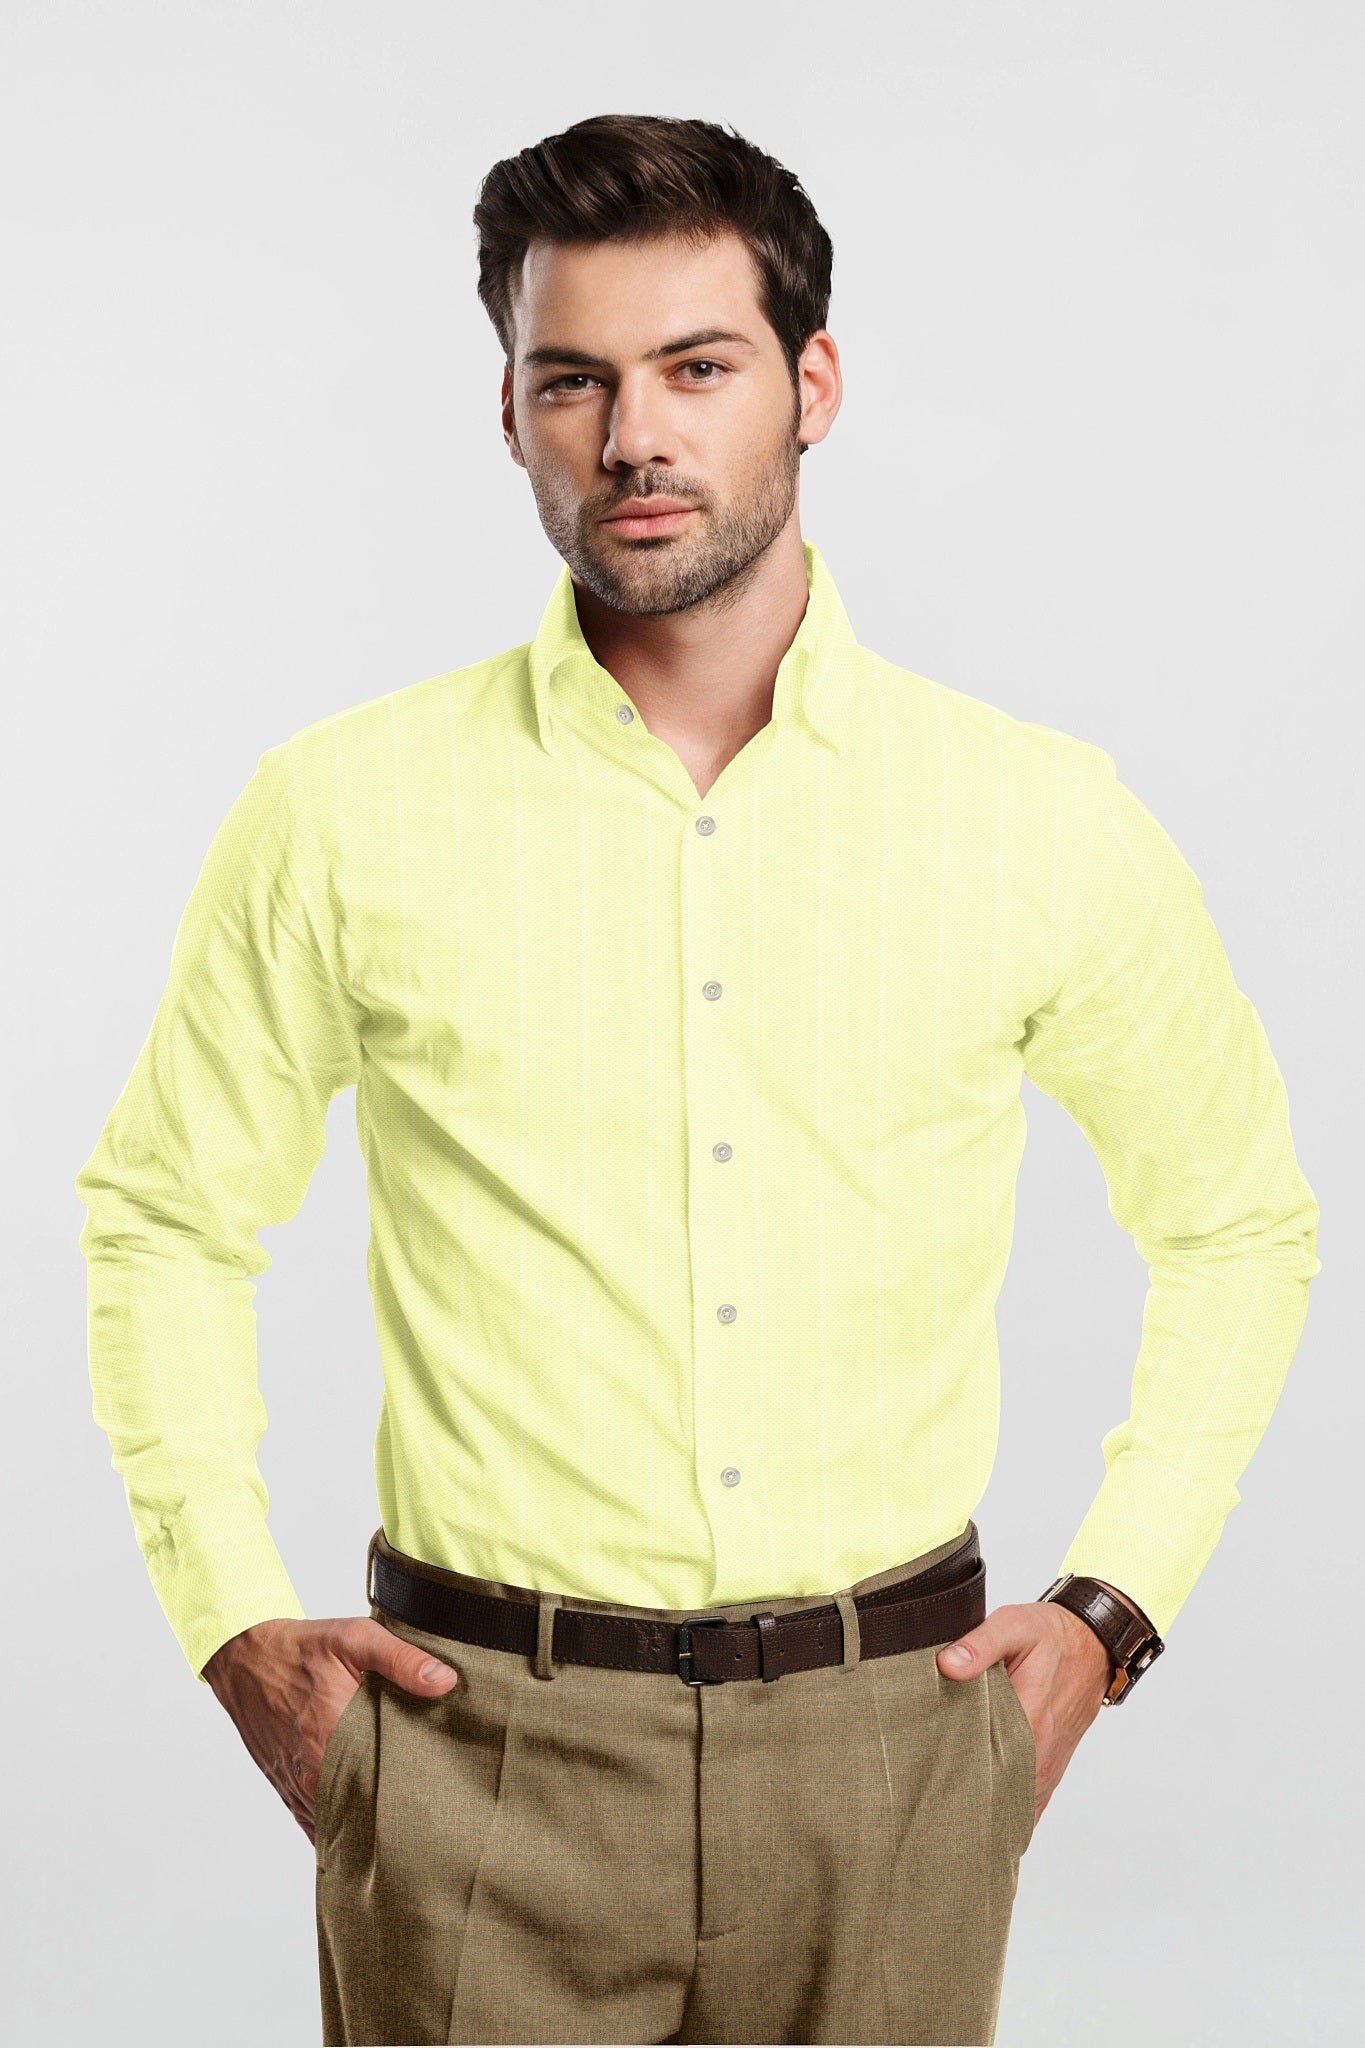 Pastel Yellow and White Wide Stripes Dobby Textured Cotton Shirt